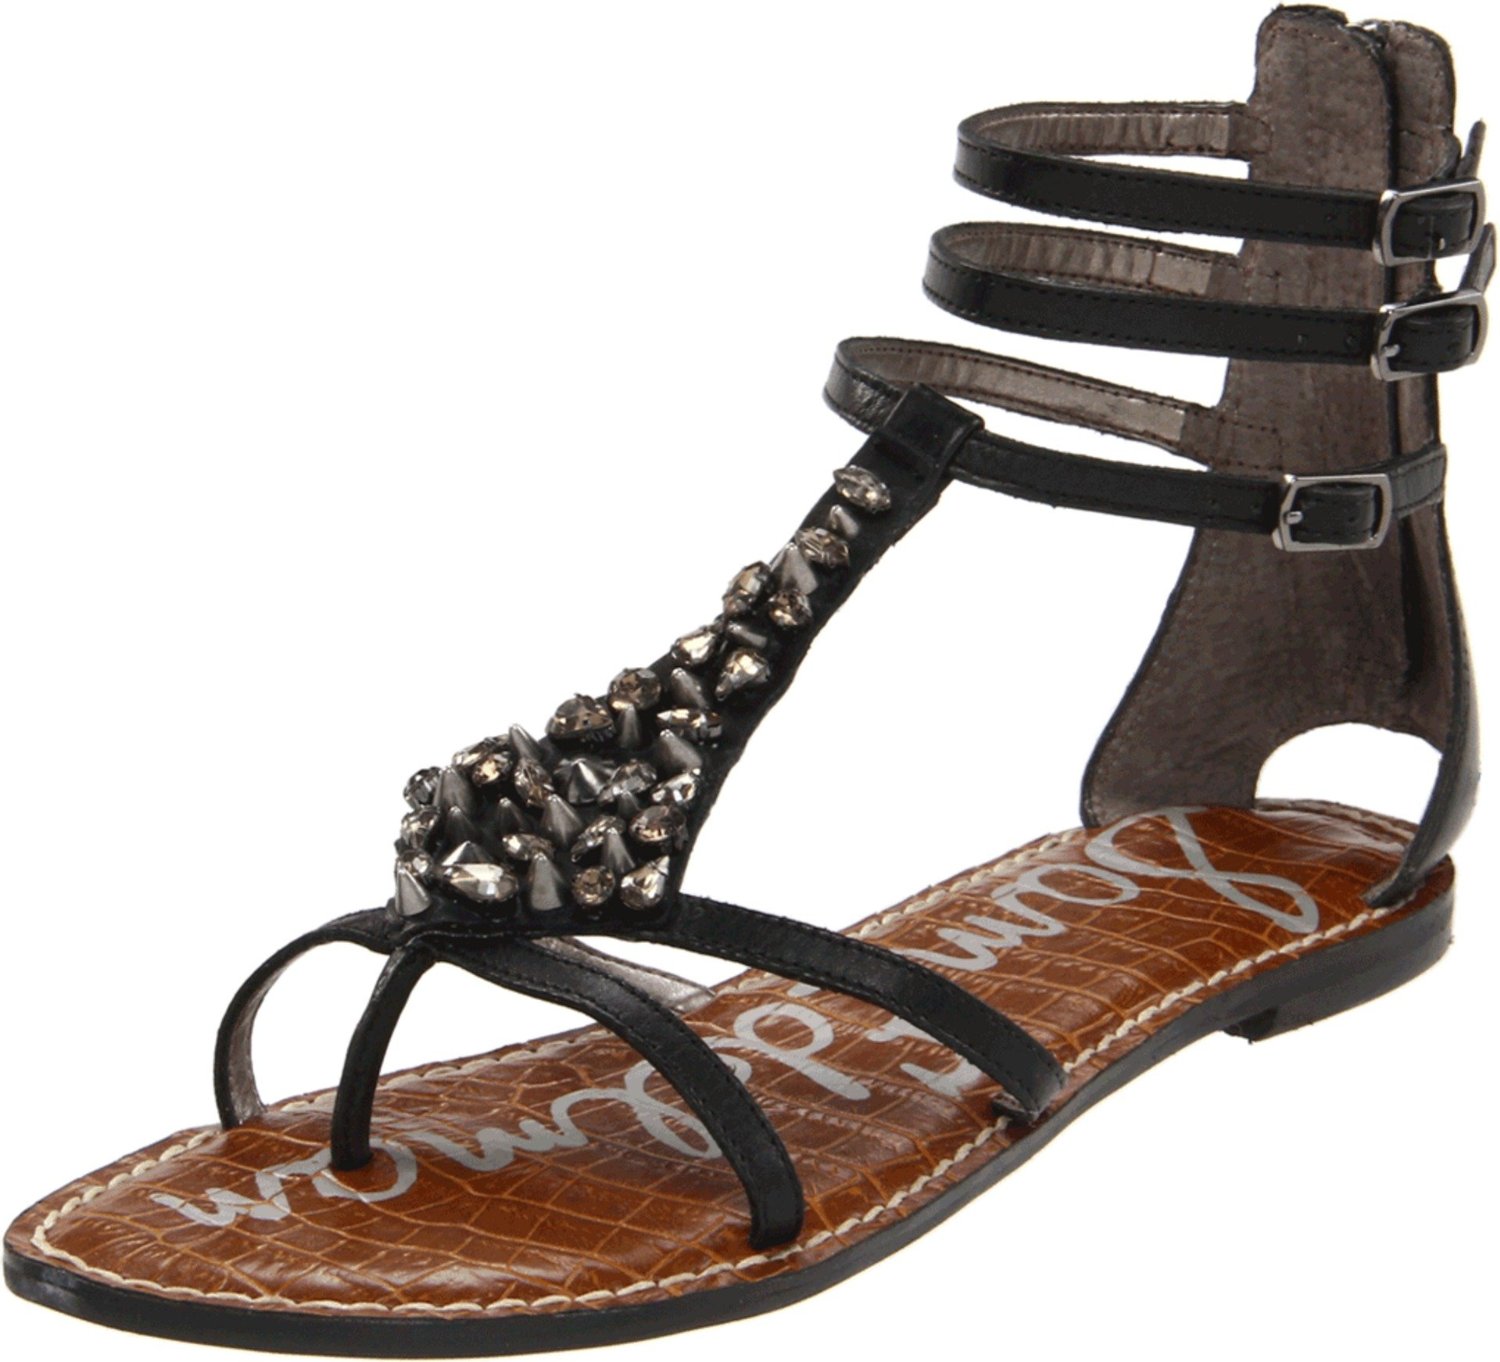 Spikes and Diamonds: Studs and Spikes on Summer Sandals